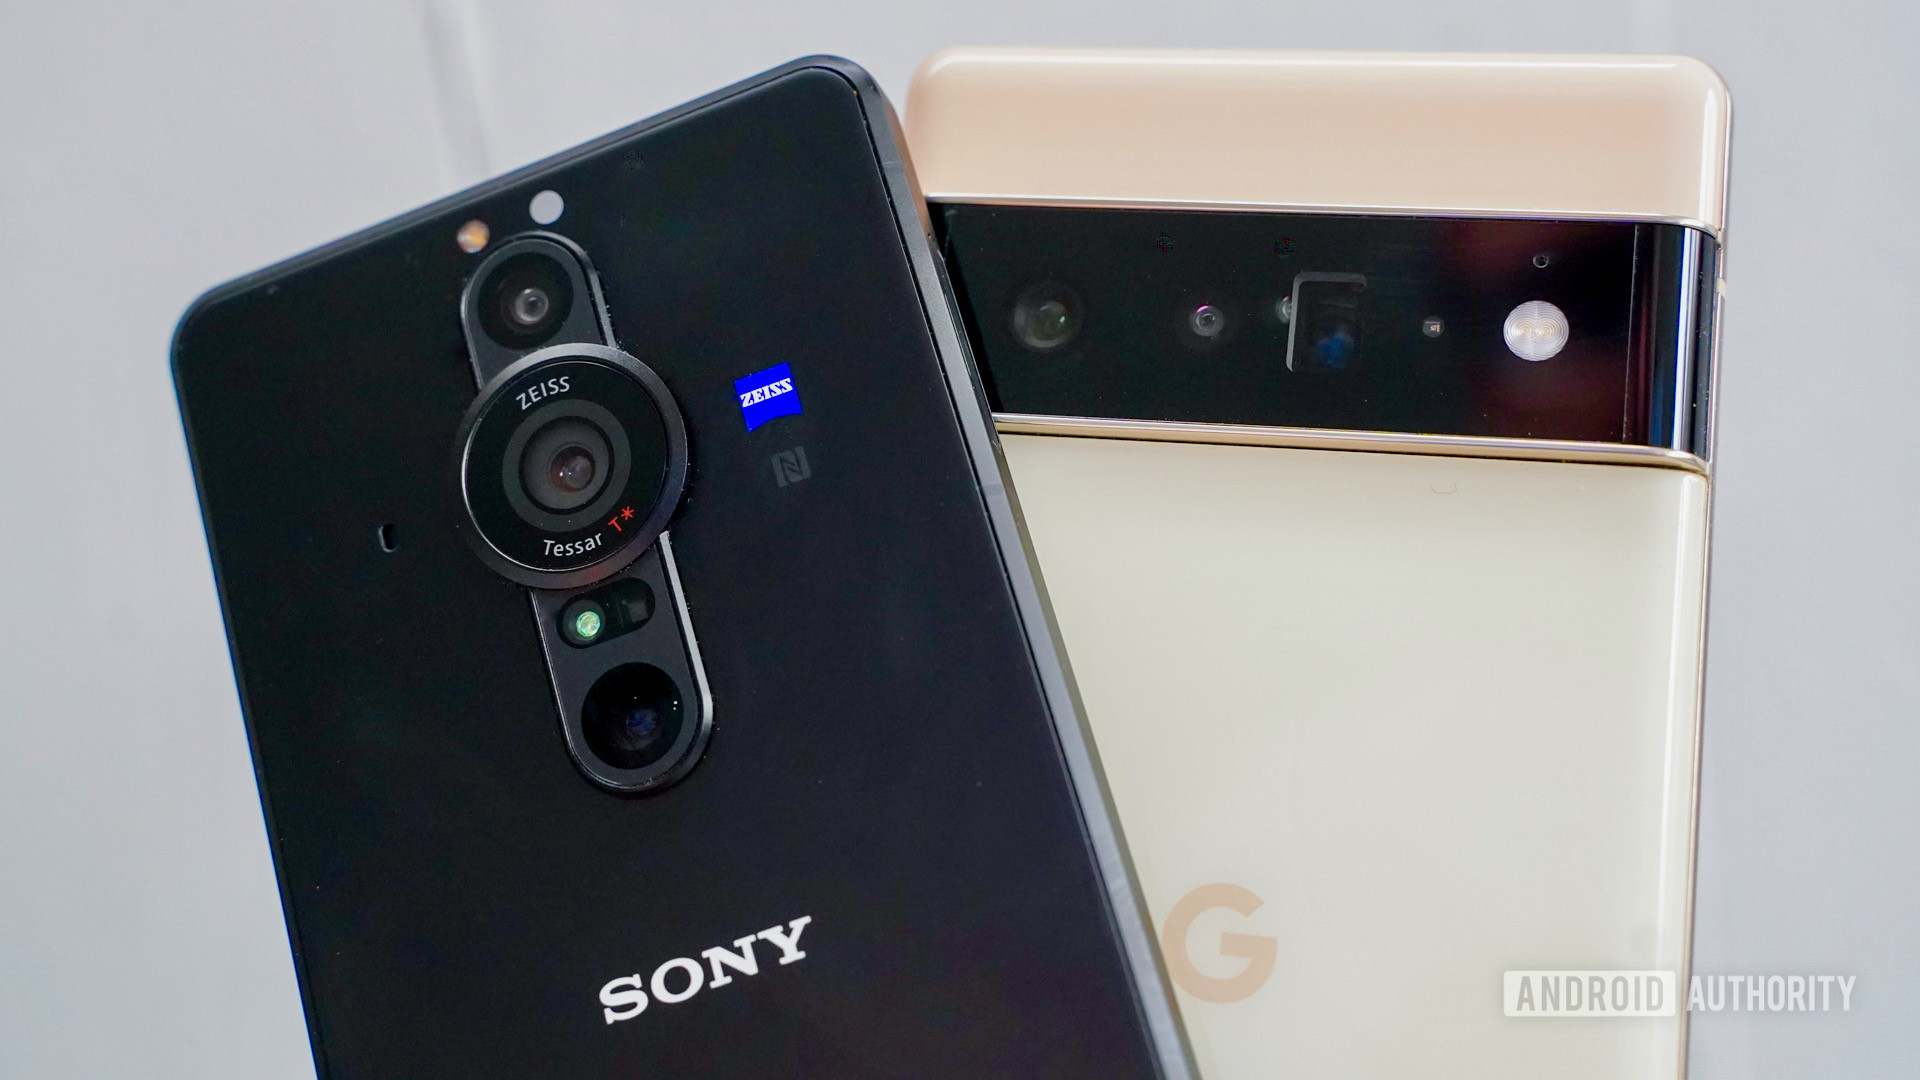 The Evolution of the Smartphone Camera: From VGA to 108MP